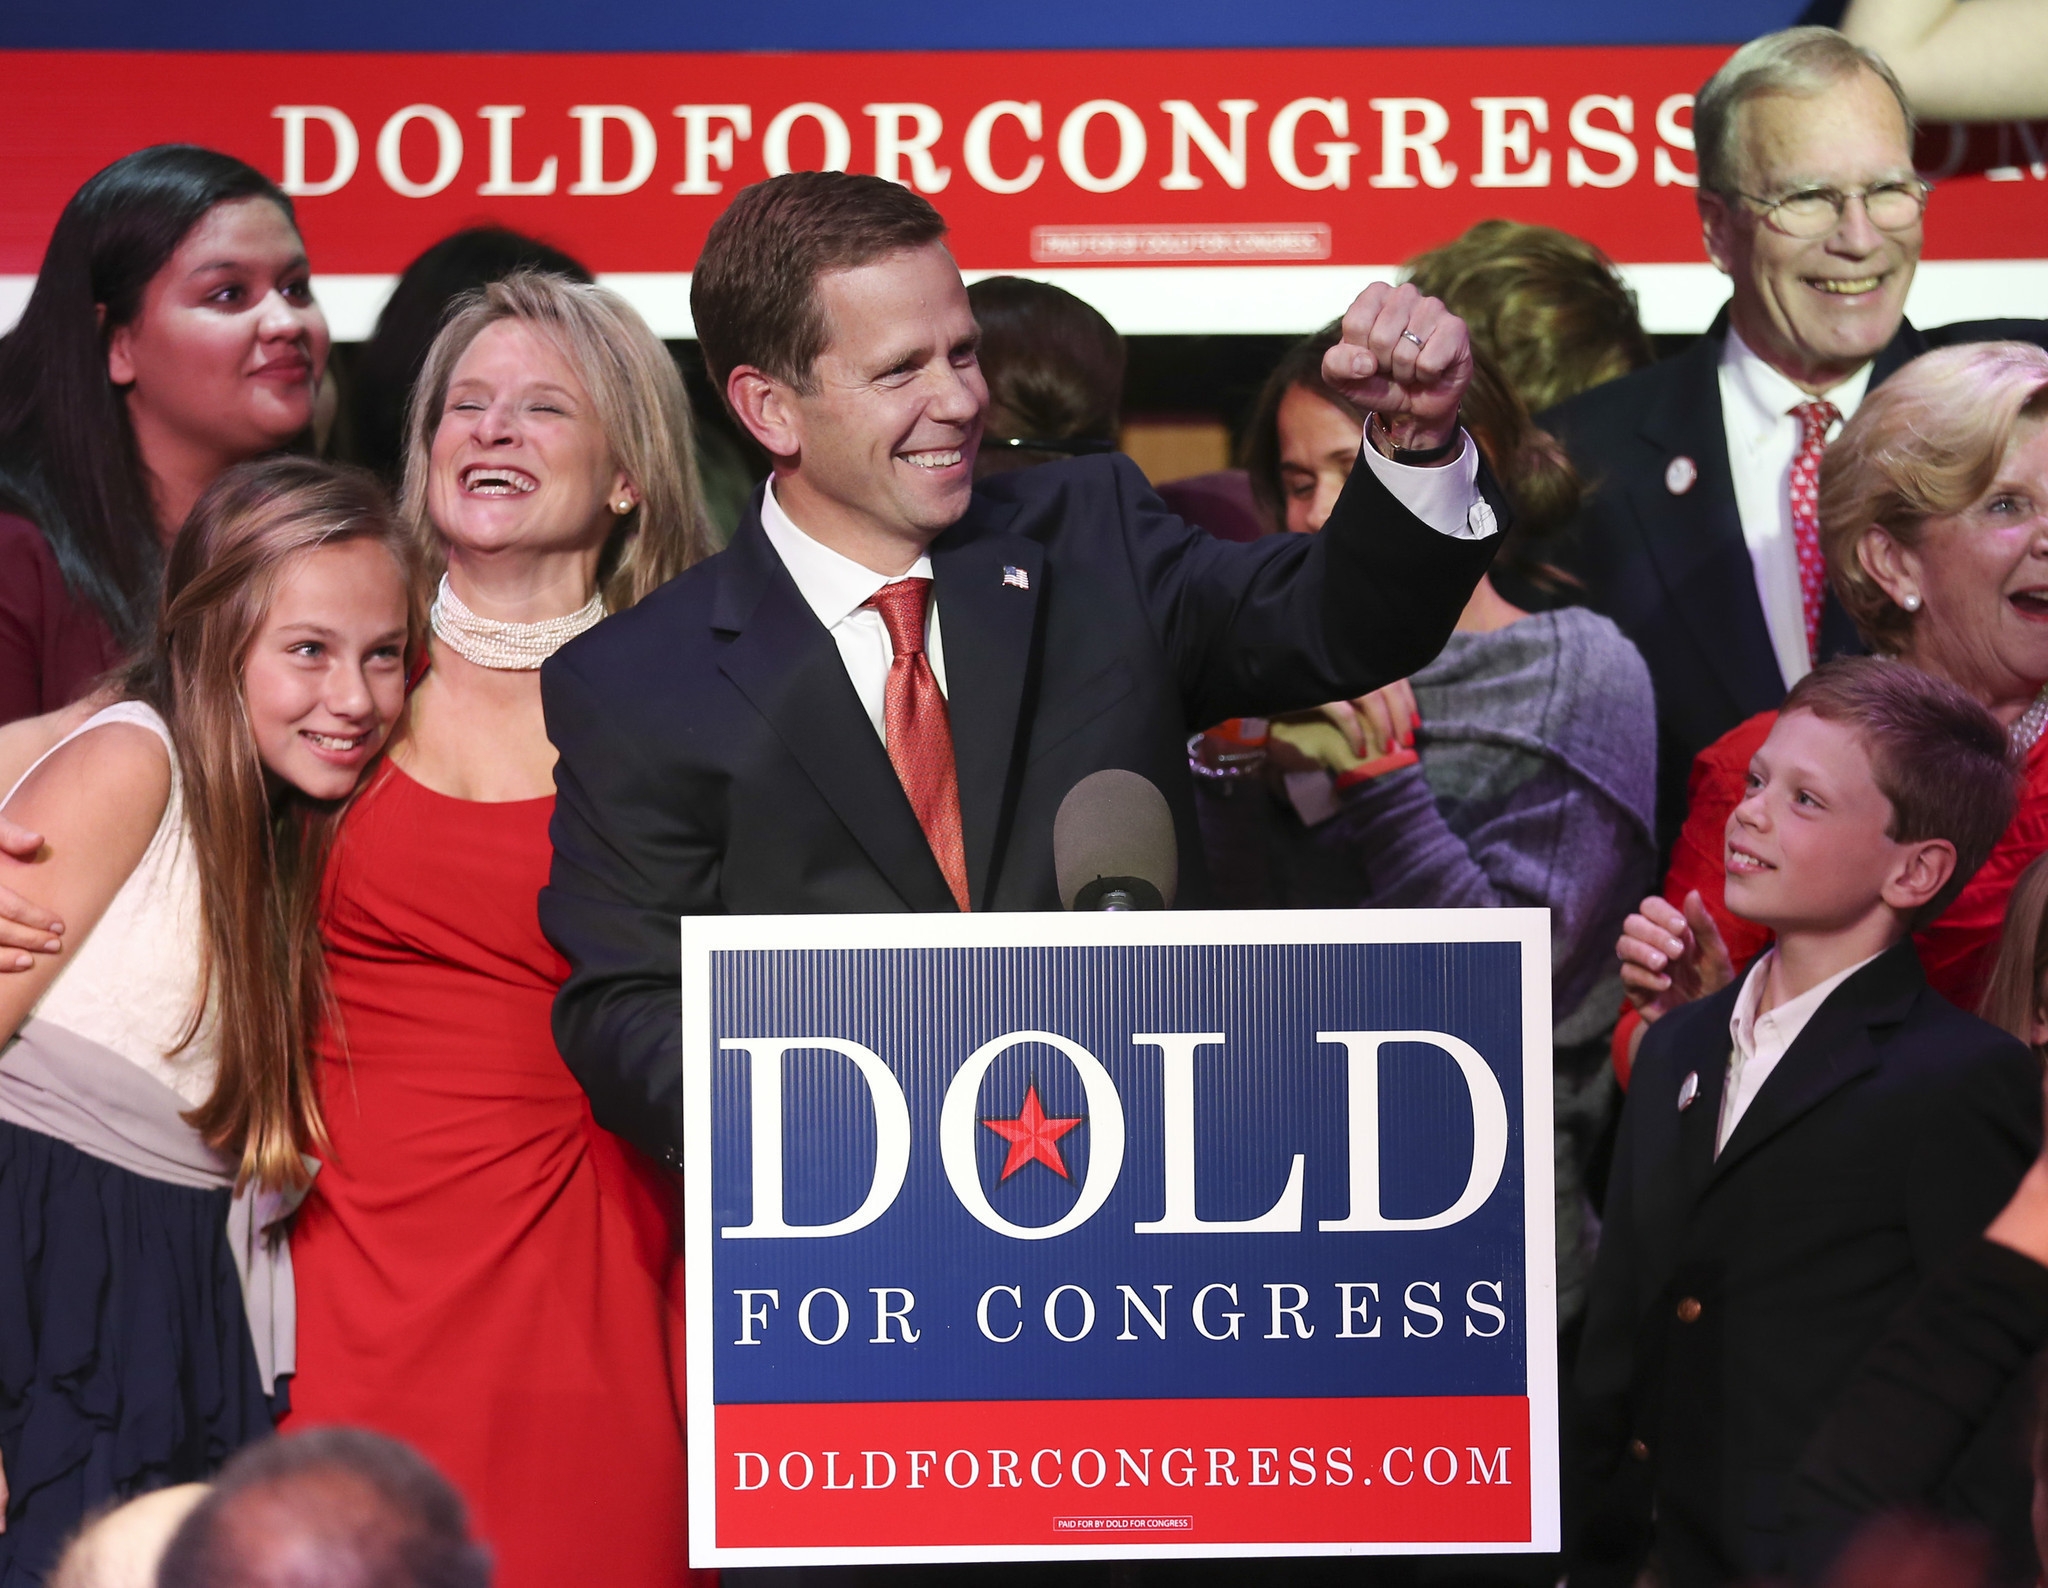 ANCA welcomes Rep. Robert Dold as new GOP Co-Chair of Armenian Caucus